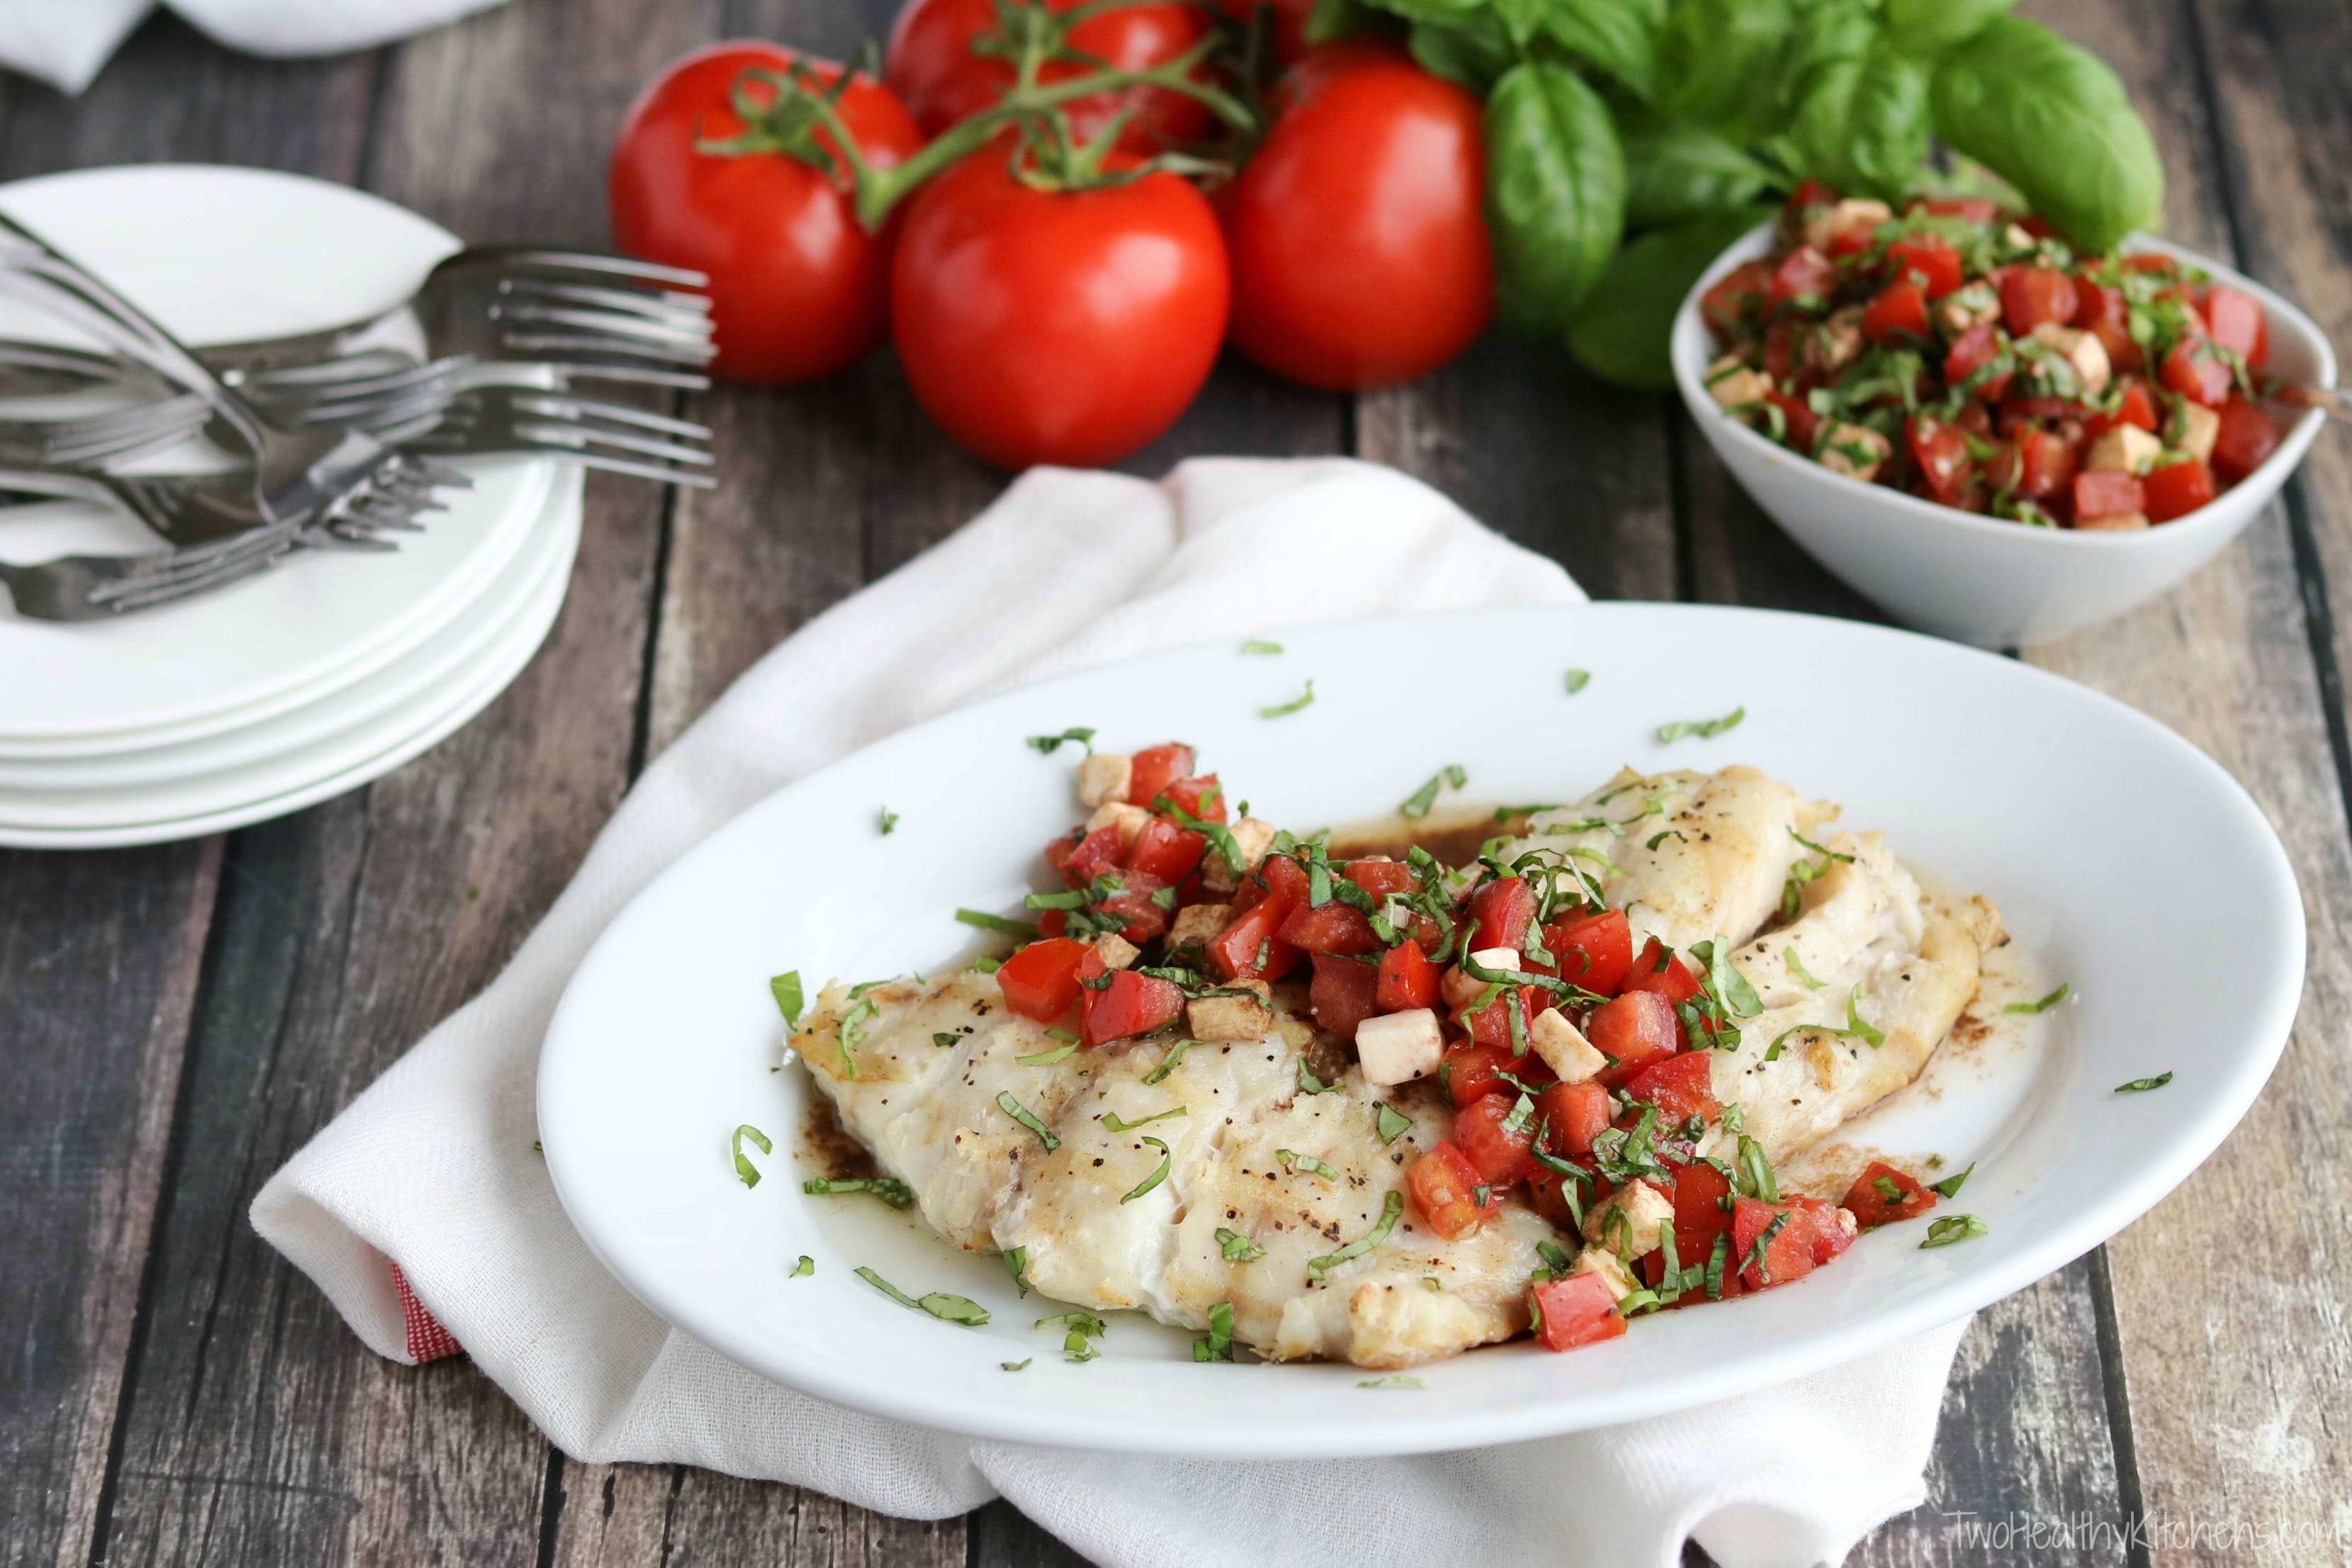 Whole grilled fish filet with caprese topping across, on white serving platter surrounded by ingredients.